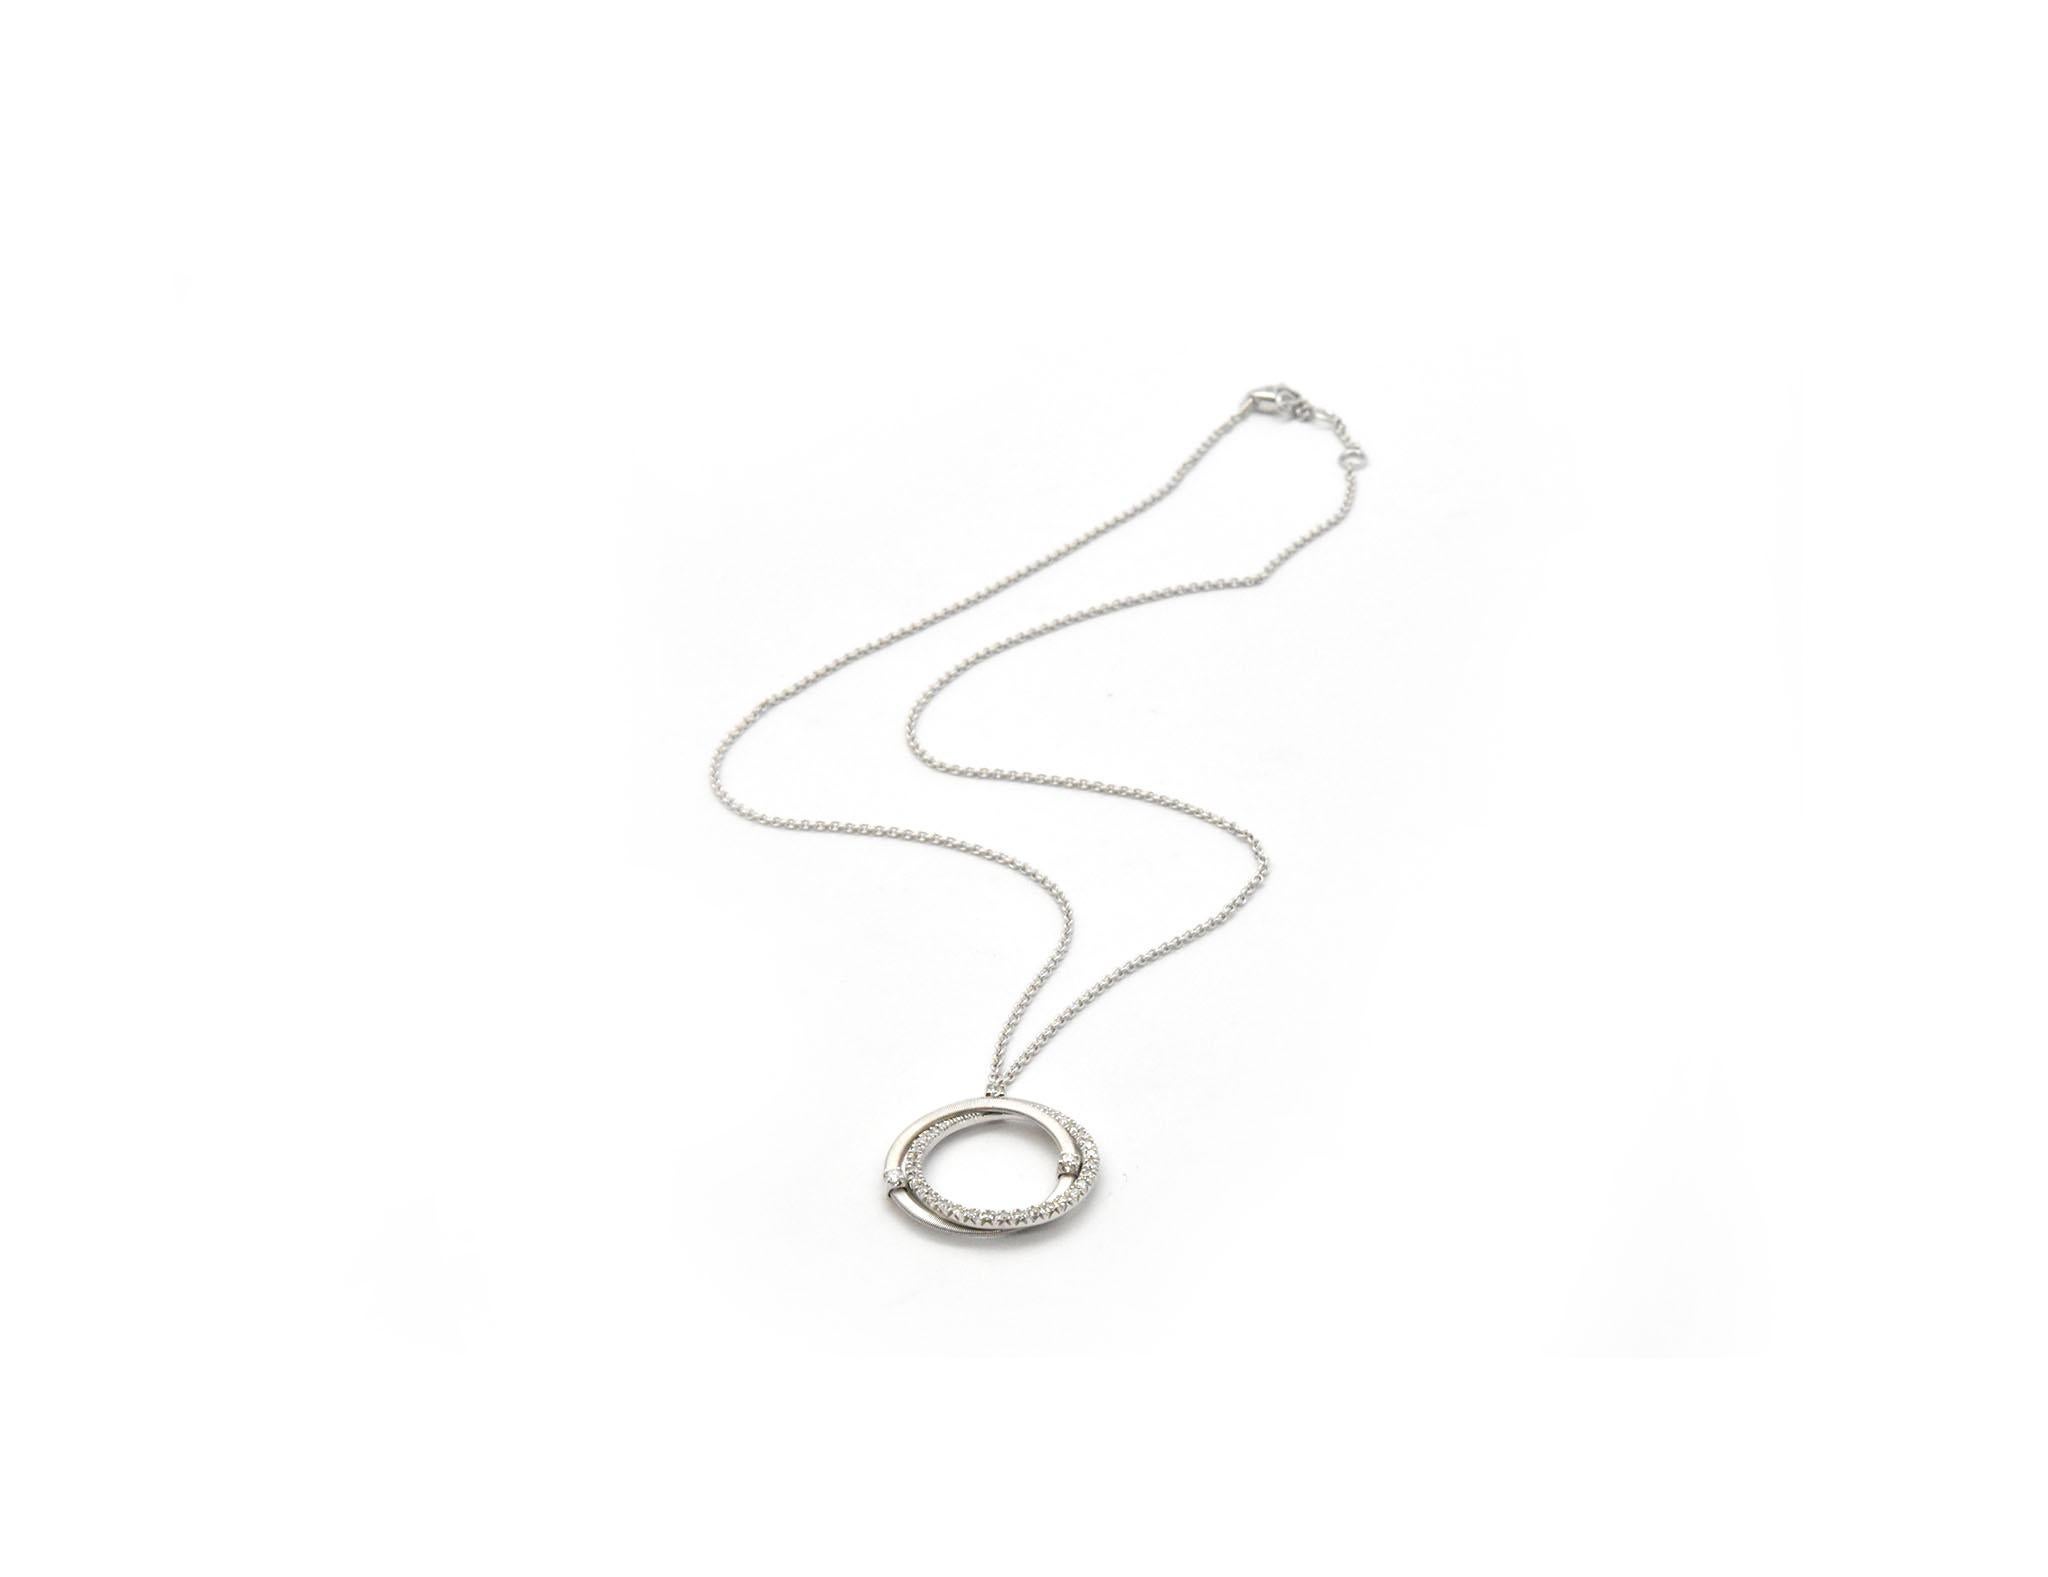 This necklace is designed in 18k white gold by Marco Bicego. The triple ring pendant is set with diamonds for a total weight of 0.51ct. The pendant measures 23mm wide, and it sits stationary on a 16-inch chain. The necklace weighs 7.71 grams. It is